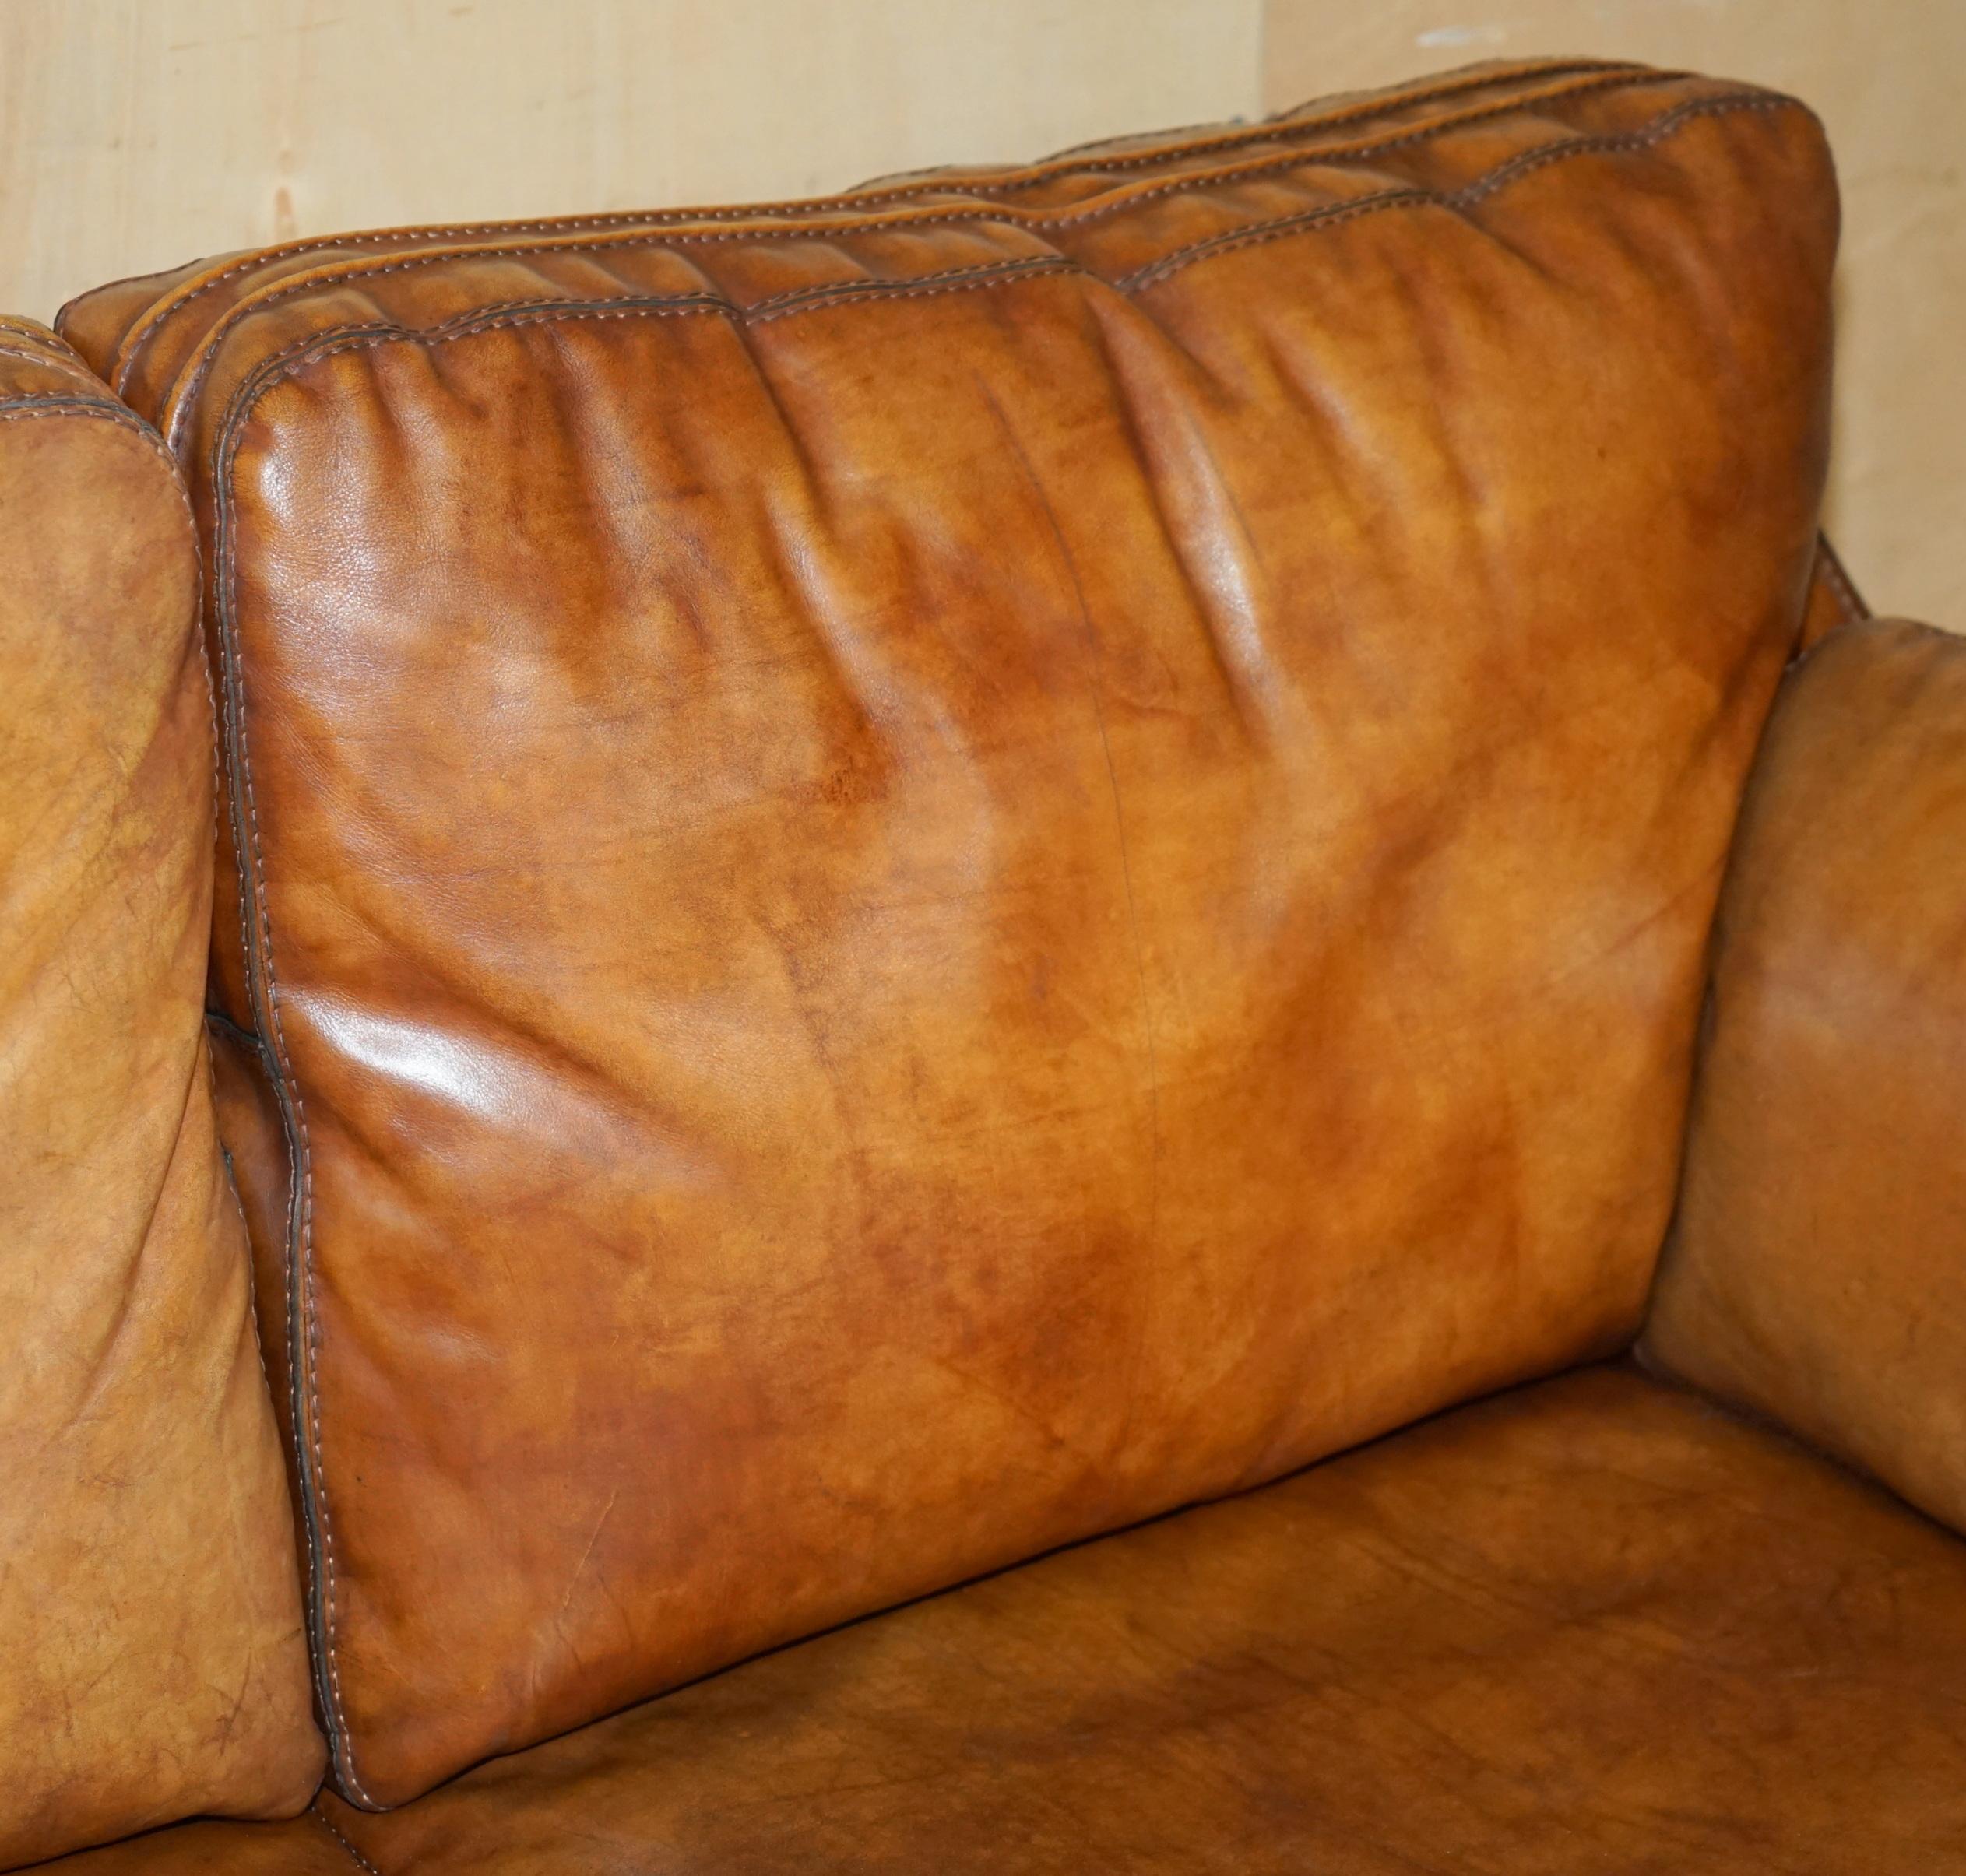 ViNTAGE BROWN LEATHER ROCHE BOBOIS MID CENTURY MODERN CONTEMPORARY SOFA For Sale 4